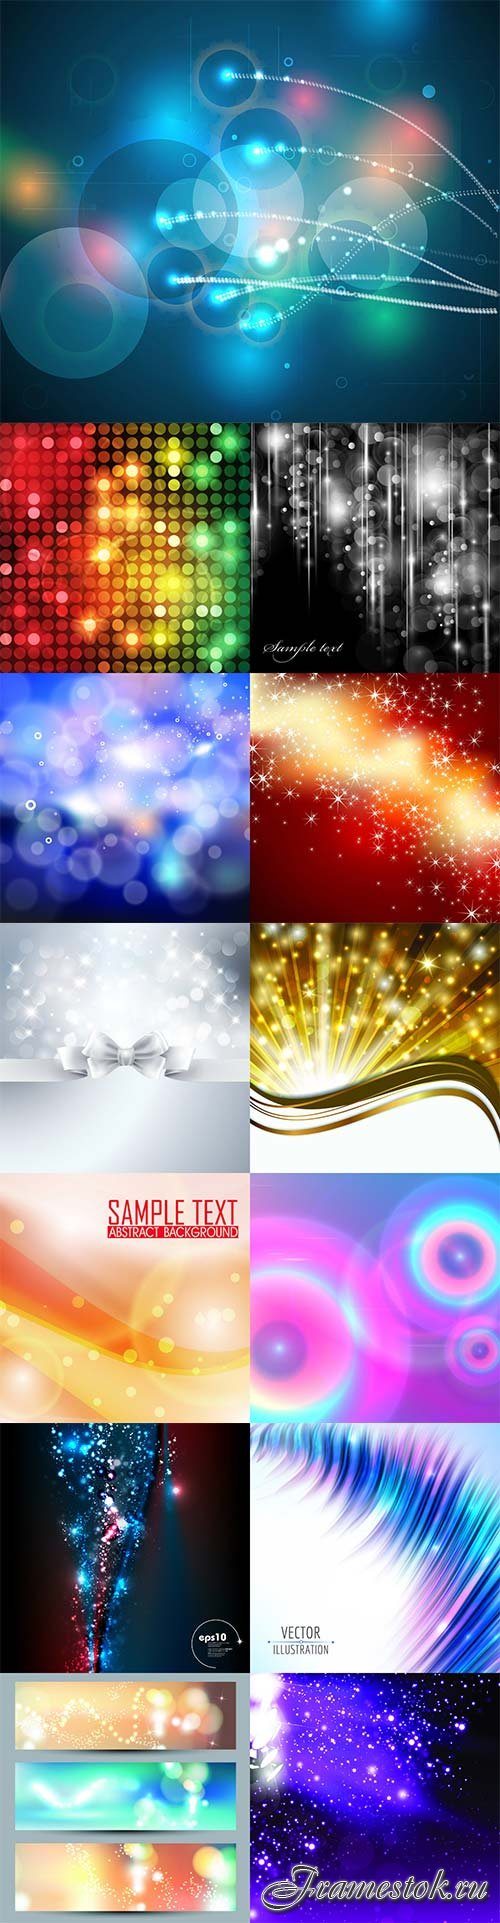 Vector bokeh colorful backgrounds - 8